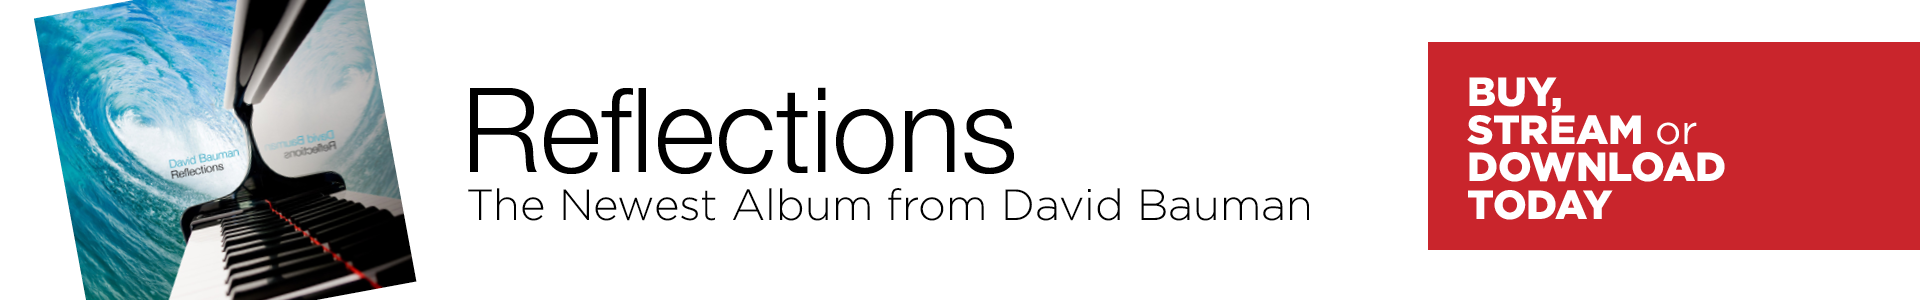 Reflections: The Newest Album from David Bauman